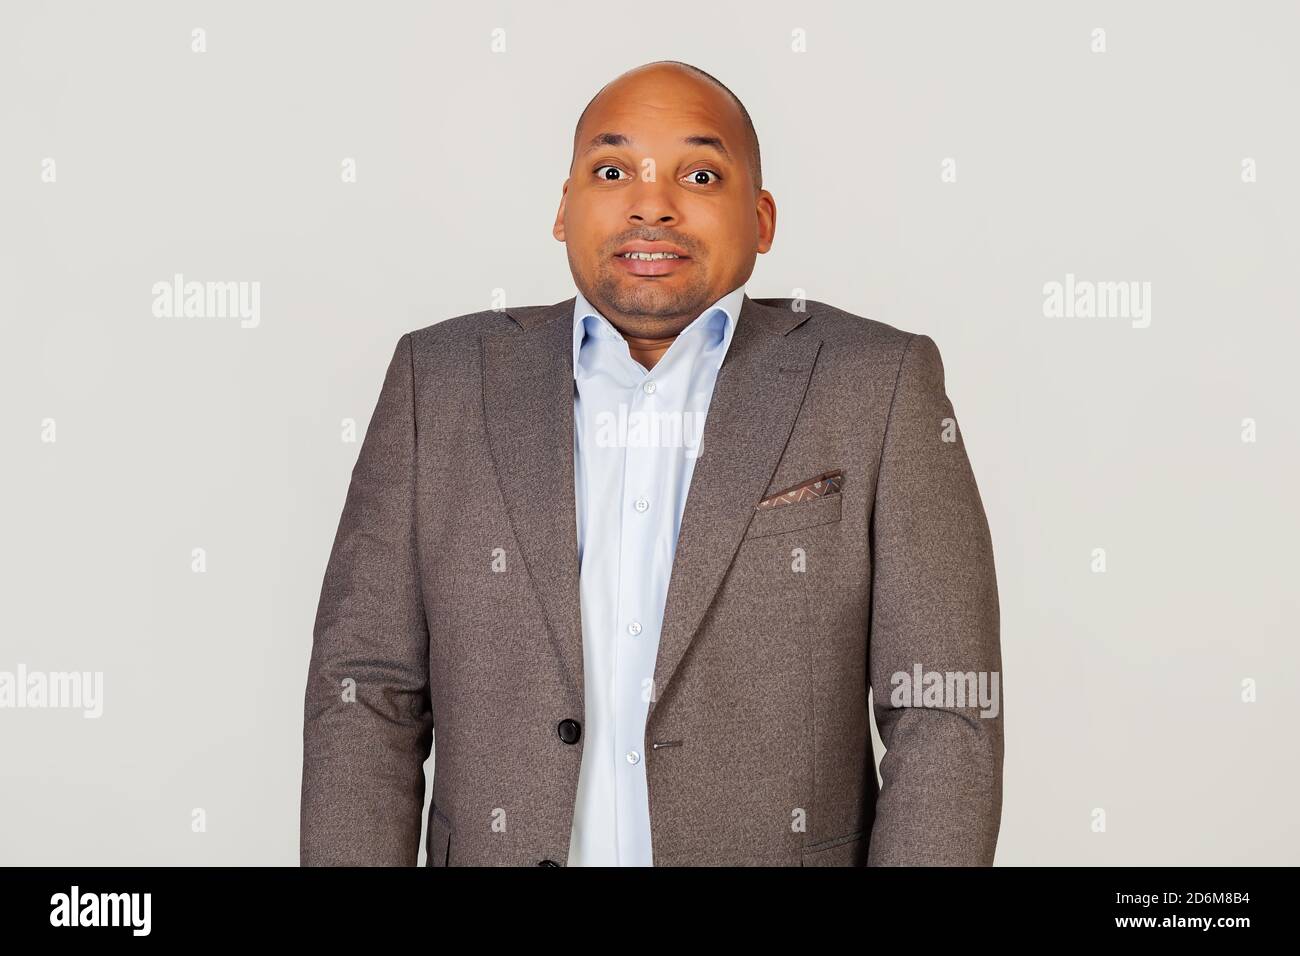 Annoyed African American guy businessman frowns with displeasure, annoyed with bad news, feeling disgusted and displeased, looks excited, gesturing funny and comical. Standing on a gray background Stock Photo